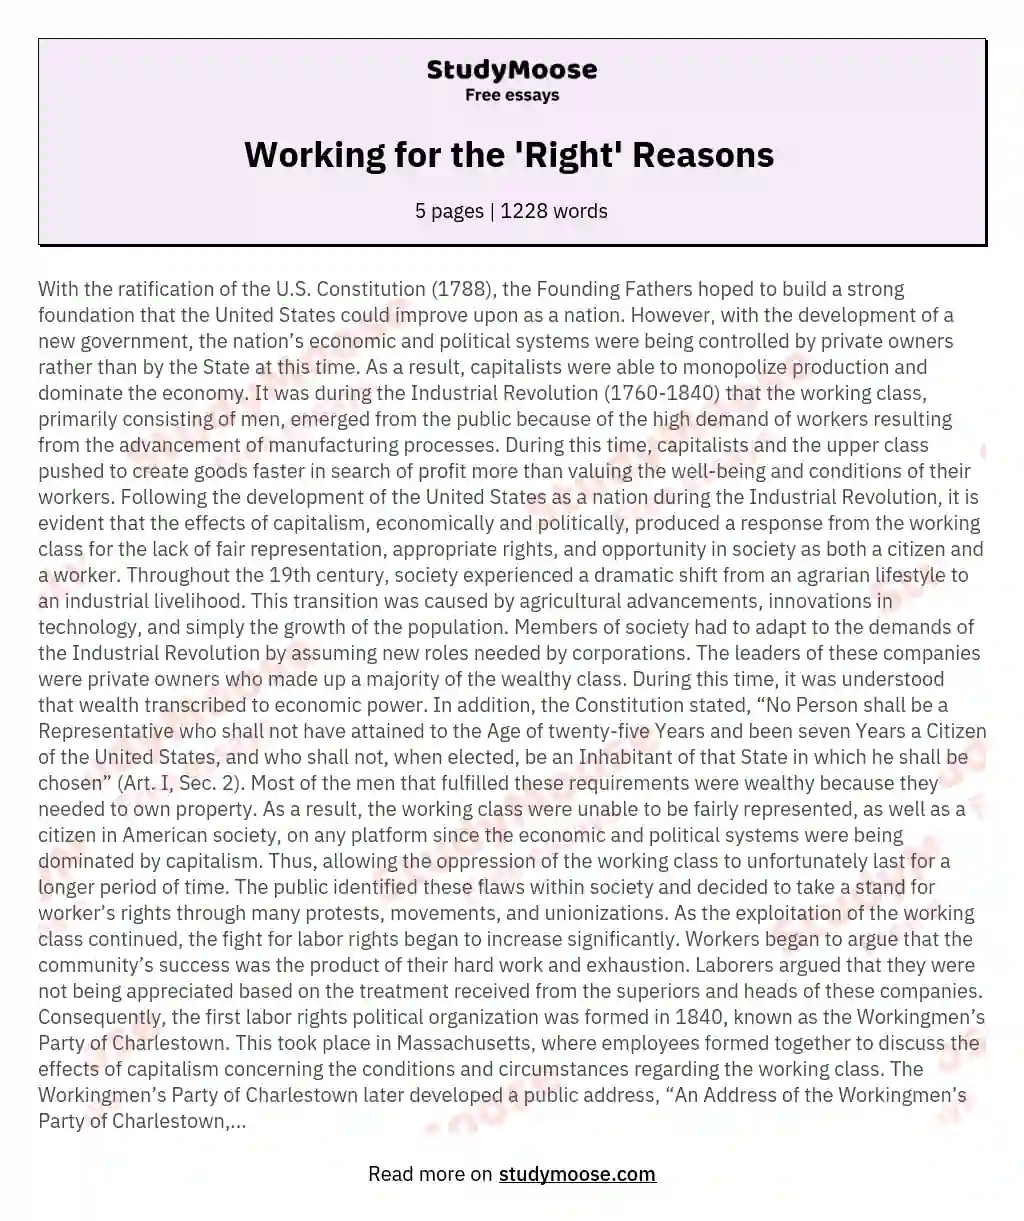 Working for the 'Right' Reasons  essay